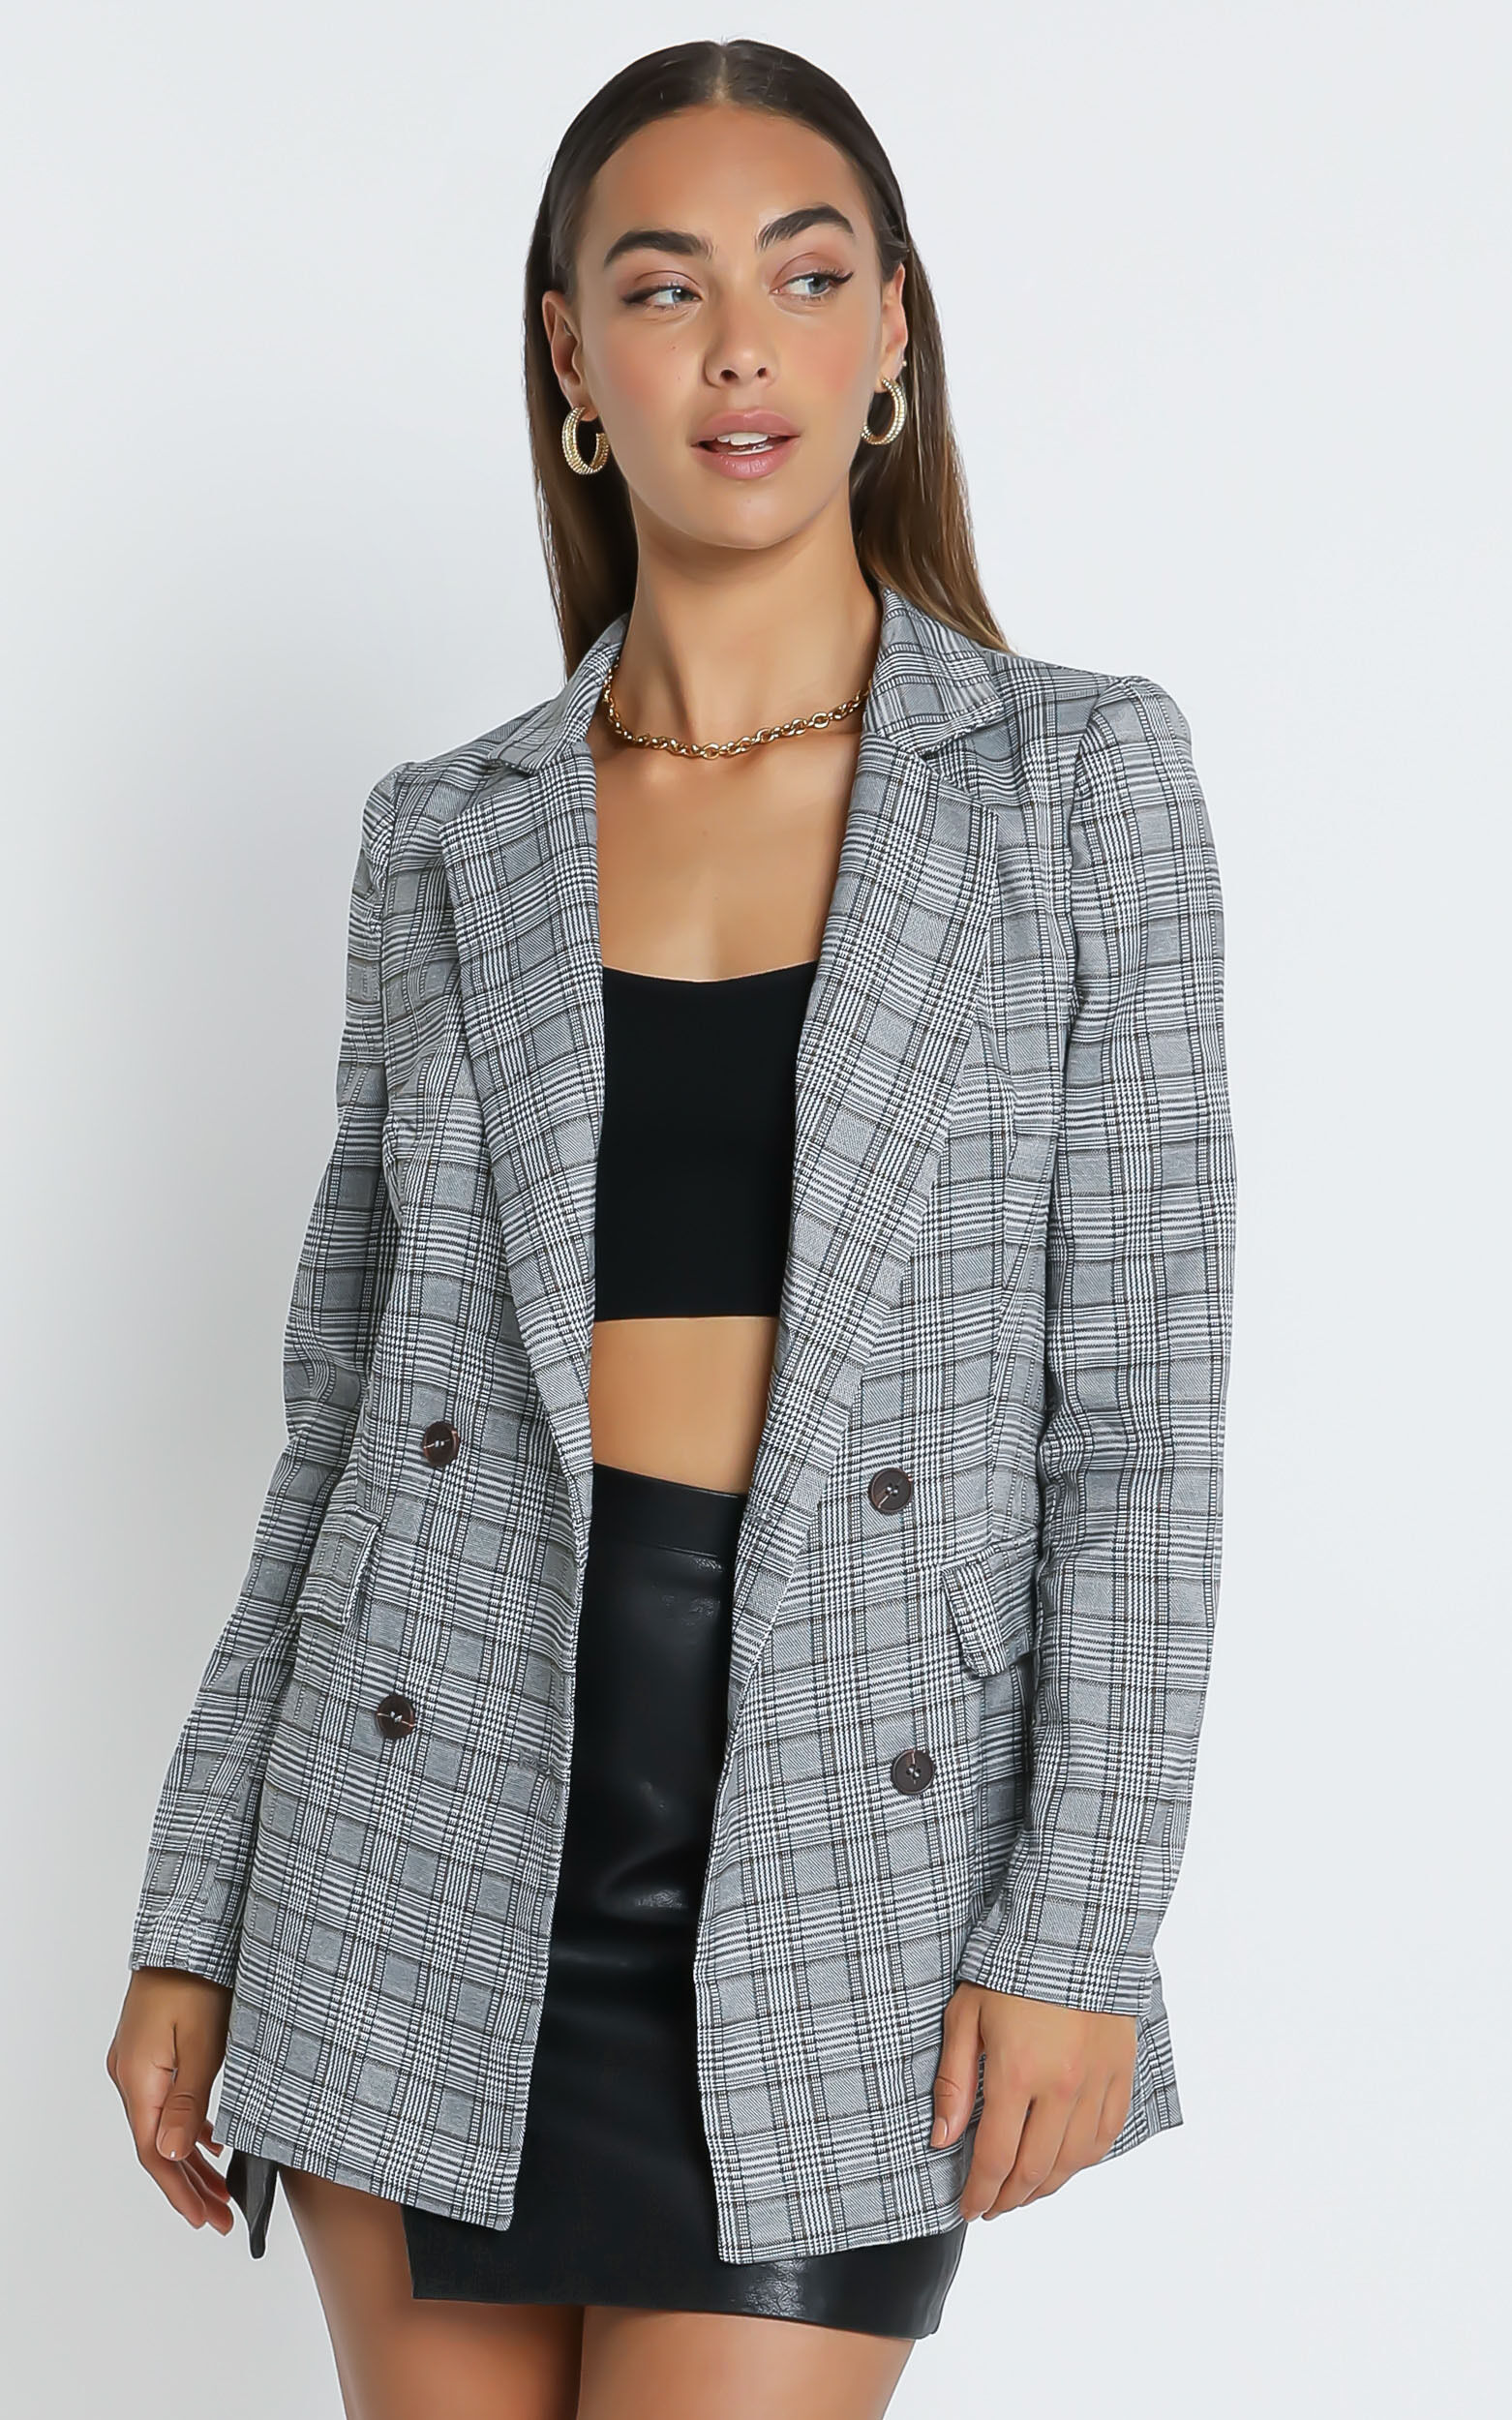 Sort It Out Blazer in Grey Check - 04, GRY1, super-hi-res image number null